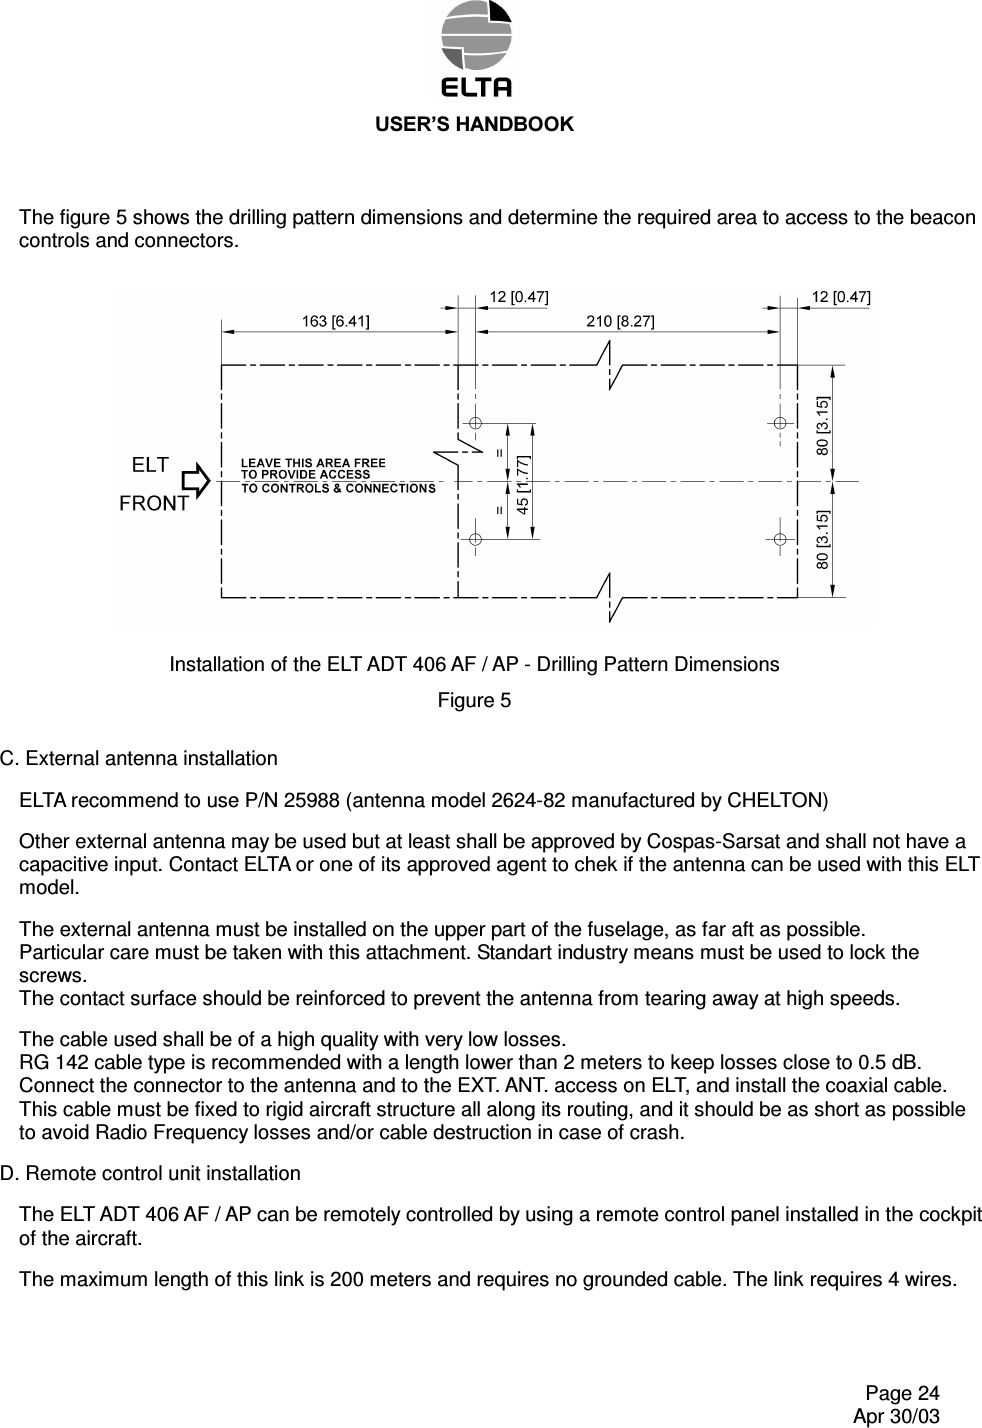 86(5¶6+$1&apos;%22.    Page 24   Apr 30/03 The figure 5 shows the drilling pattern dimensions and determine the required area to access to the beacon controls and connectors. Installation of the ELT ADT 406 AF / AP - Drilling Pattern Dimensions Figure 5  C. External antenna installation ELTA recommend to use P/N 25988 (antenna model 2624-82 manufactured by CHELTON) Other external antenna may be used but at least shall be approved by Cospas-Sarsat and shall not have a capacitive input. Contact ELTA or one of its approved agent to chek if the antenna can be used with this ELT model. The external antenna must be installed on the upper part of the fuselage, as far aft as possible. Particular care must be taken with this attachment. Standart industry means must be used to lock the screws. The contact surface should be reinforced to prevent the antenna from tearing away at high speeds. The cable used shall be of a high quality with very low losses. RG 142 cable type is recommended with a length lower than 2 meters to keep losses close to 0.5 dB. Connect the connector to the antenna and to the EXT. ANT. access on ELT, and install the coaxial cable. This cable must be fixed to rigid aircraft structure all along its routing, and it should be as short as possible to avoid Radio Frequency losses and/or cable destruction in case of crash. D. Remote control unit installation The ELT ADT 406 AF / AP can be remotely controlled by using a remote control panel installed in the cockpit of the aircraft. The maximum length of this link is 200 meters and requires no grounded cable. The link requires 4 wires. 